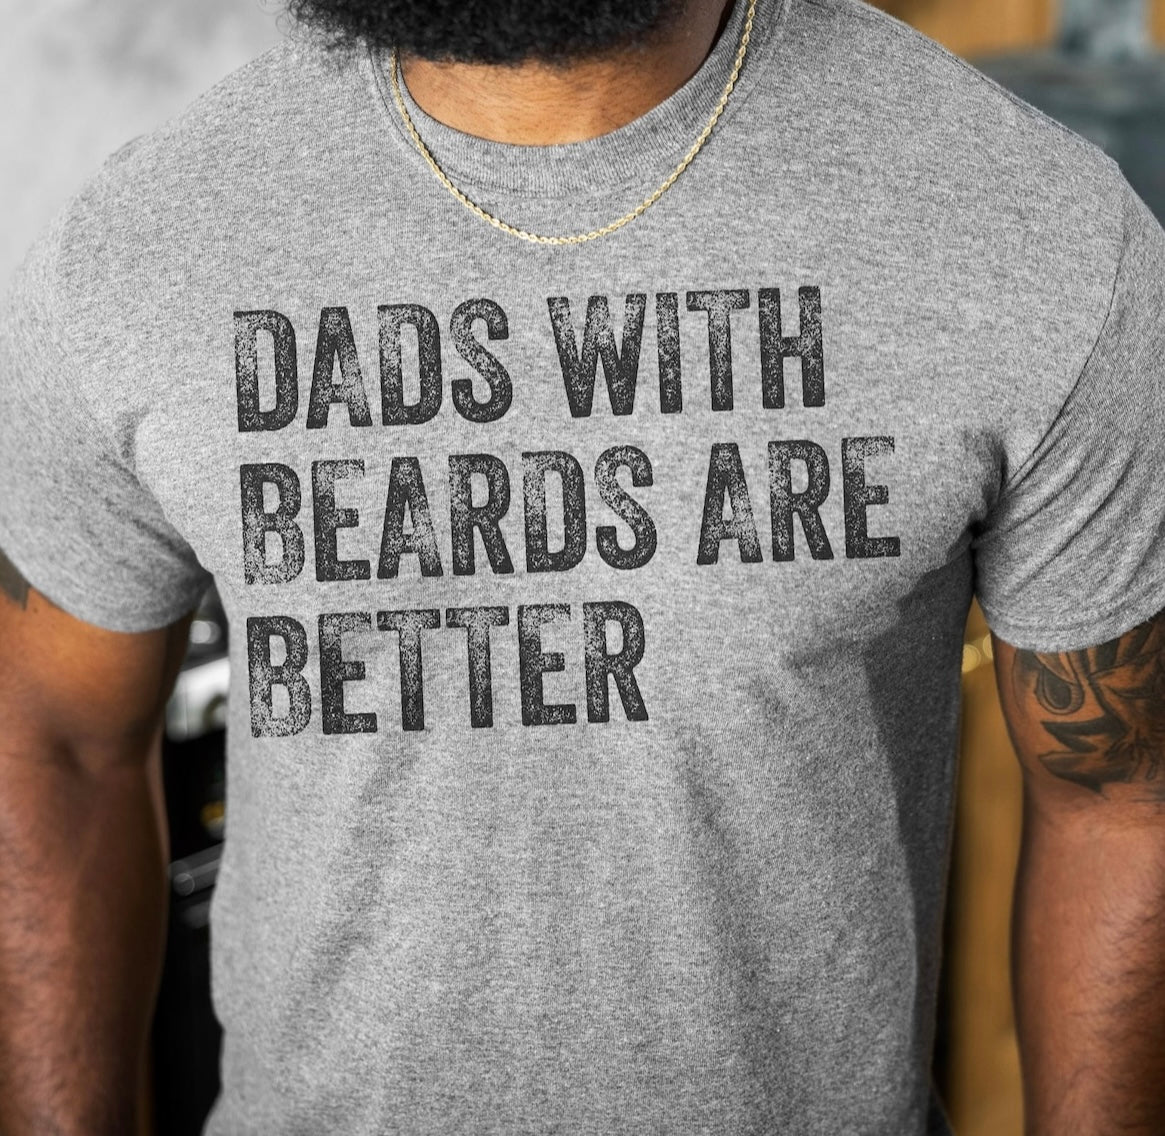 Dads w/Beards are Better